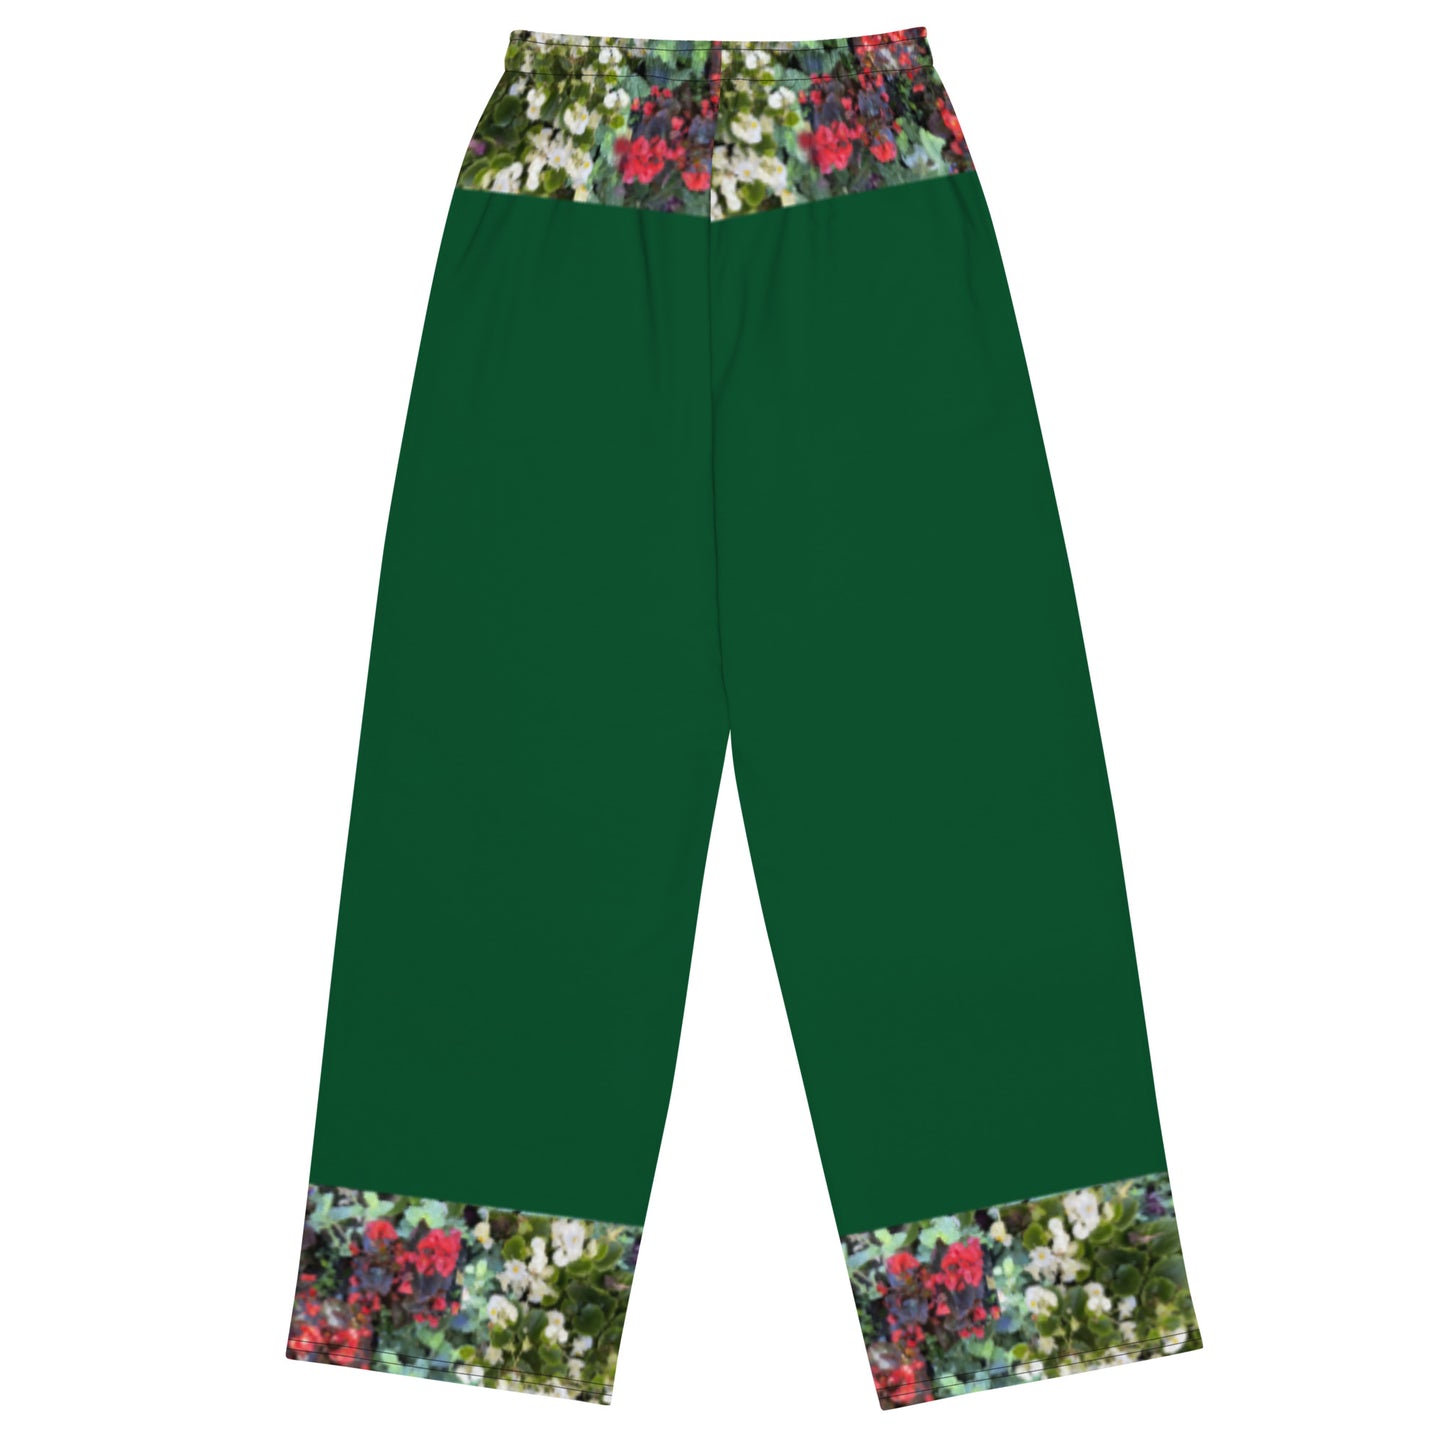 All-over print unisex wide-leg pants flowerbed